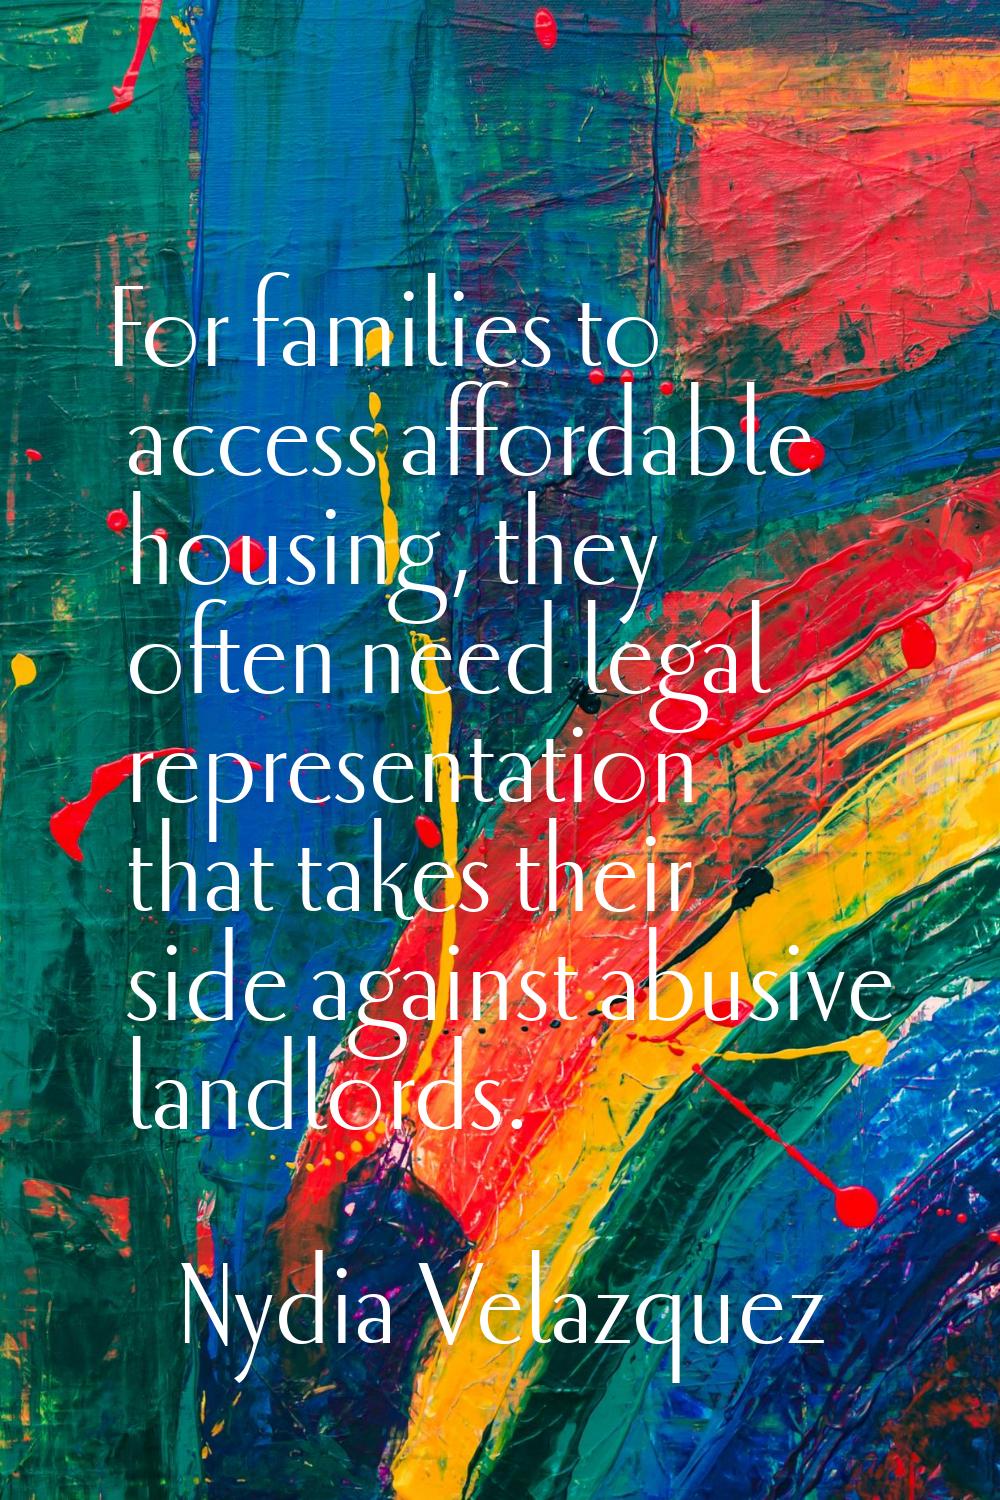 For families to access affordable housing, they often need legal representation that takes their si